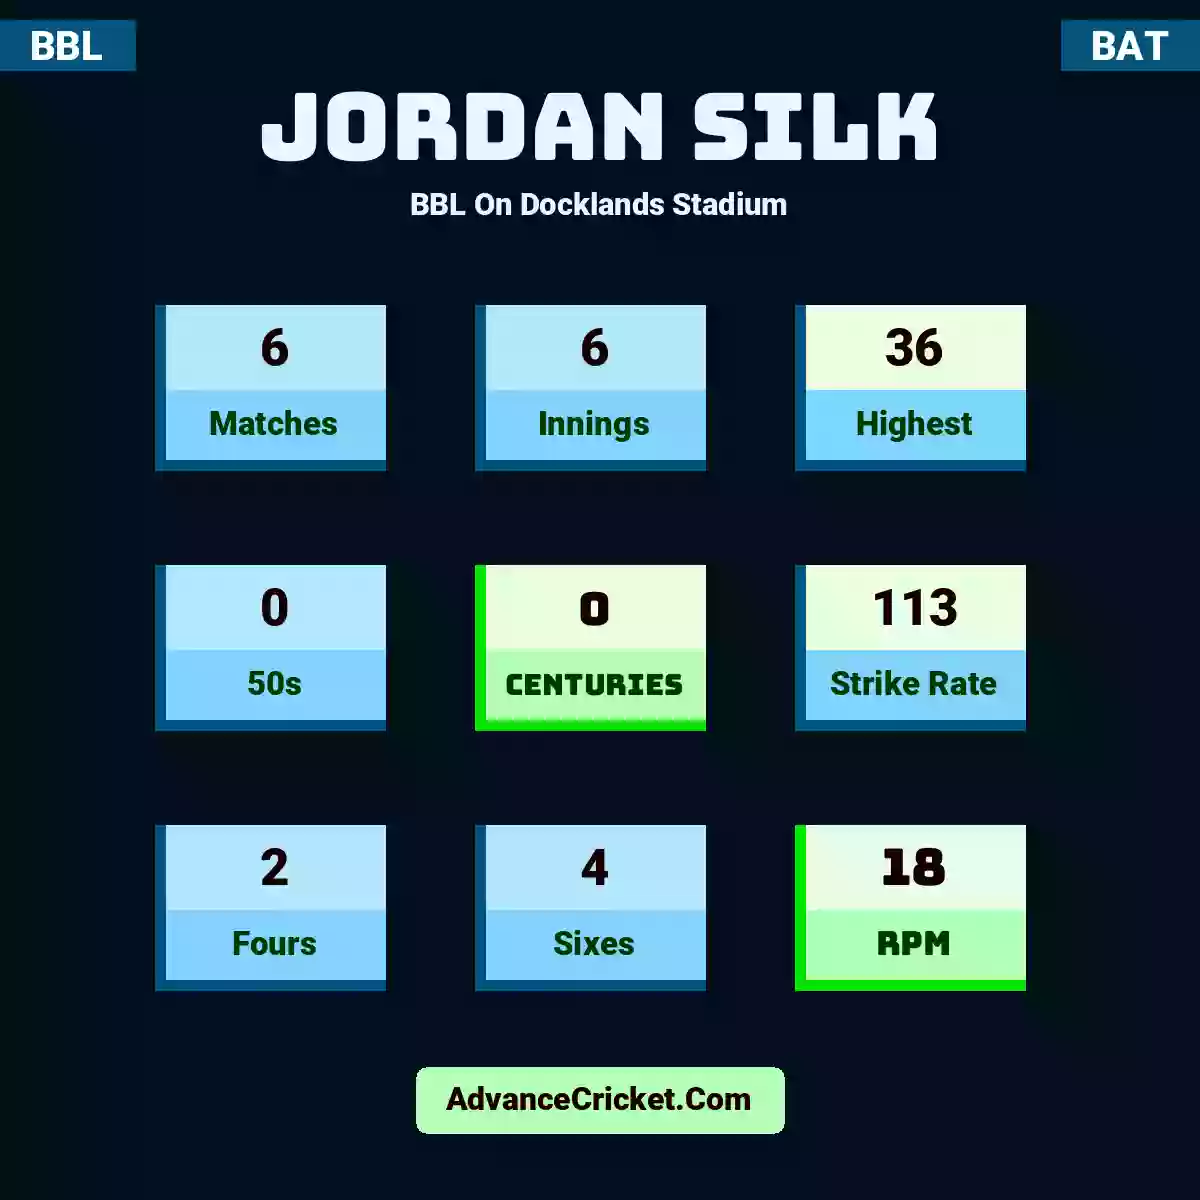 Jordan Silk BBL  On Docklands Stadium, Jordan Silk played 6 matches, scored 36 runs as highest, 0 half-centuries, and 0 centuries, with a strike rate of 113. J.Silk hit 2 fours and 4 sixes, with an RPM of 18.